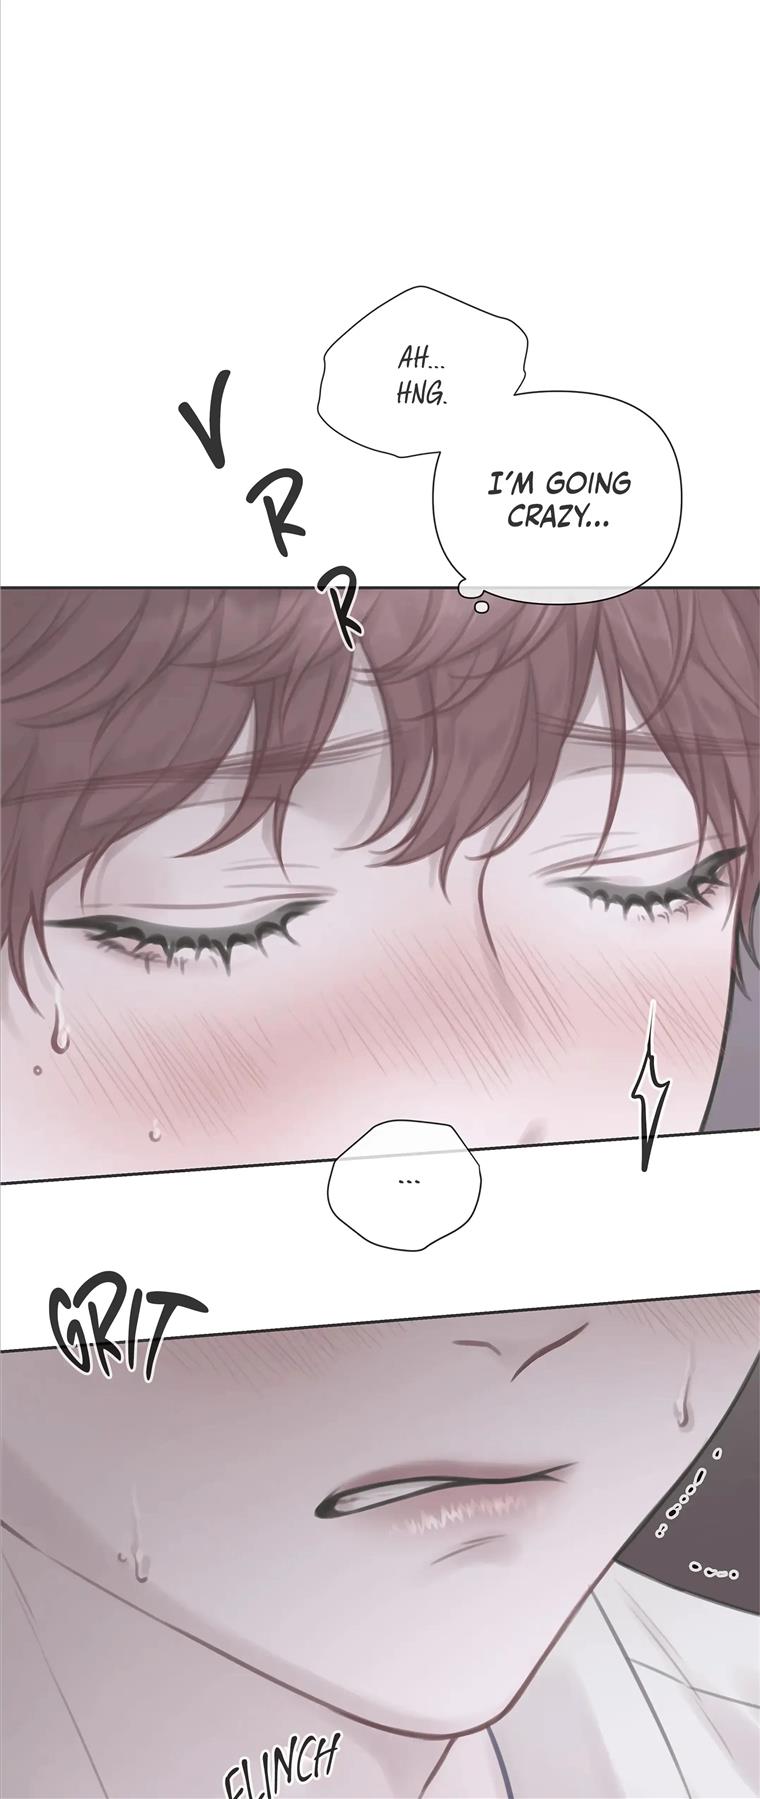 Secretary Jin's Confinement Diary - Page 2